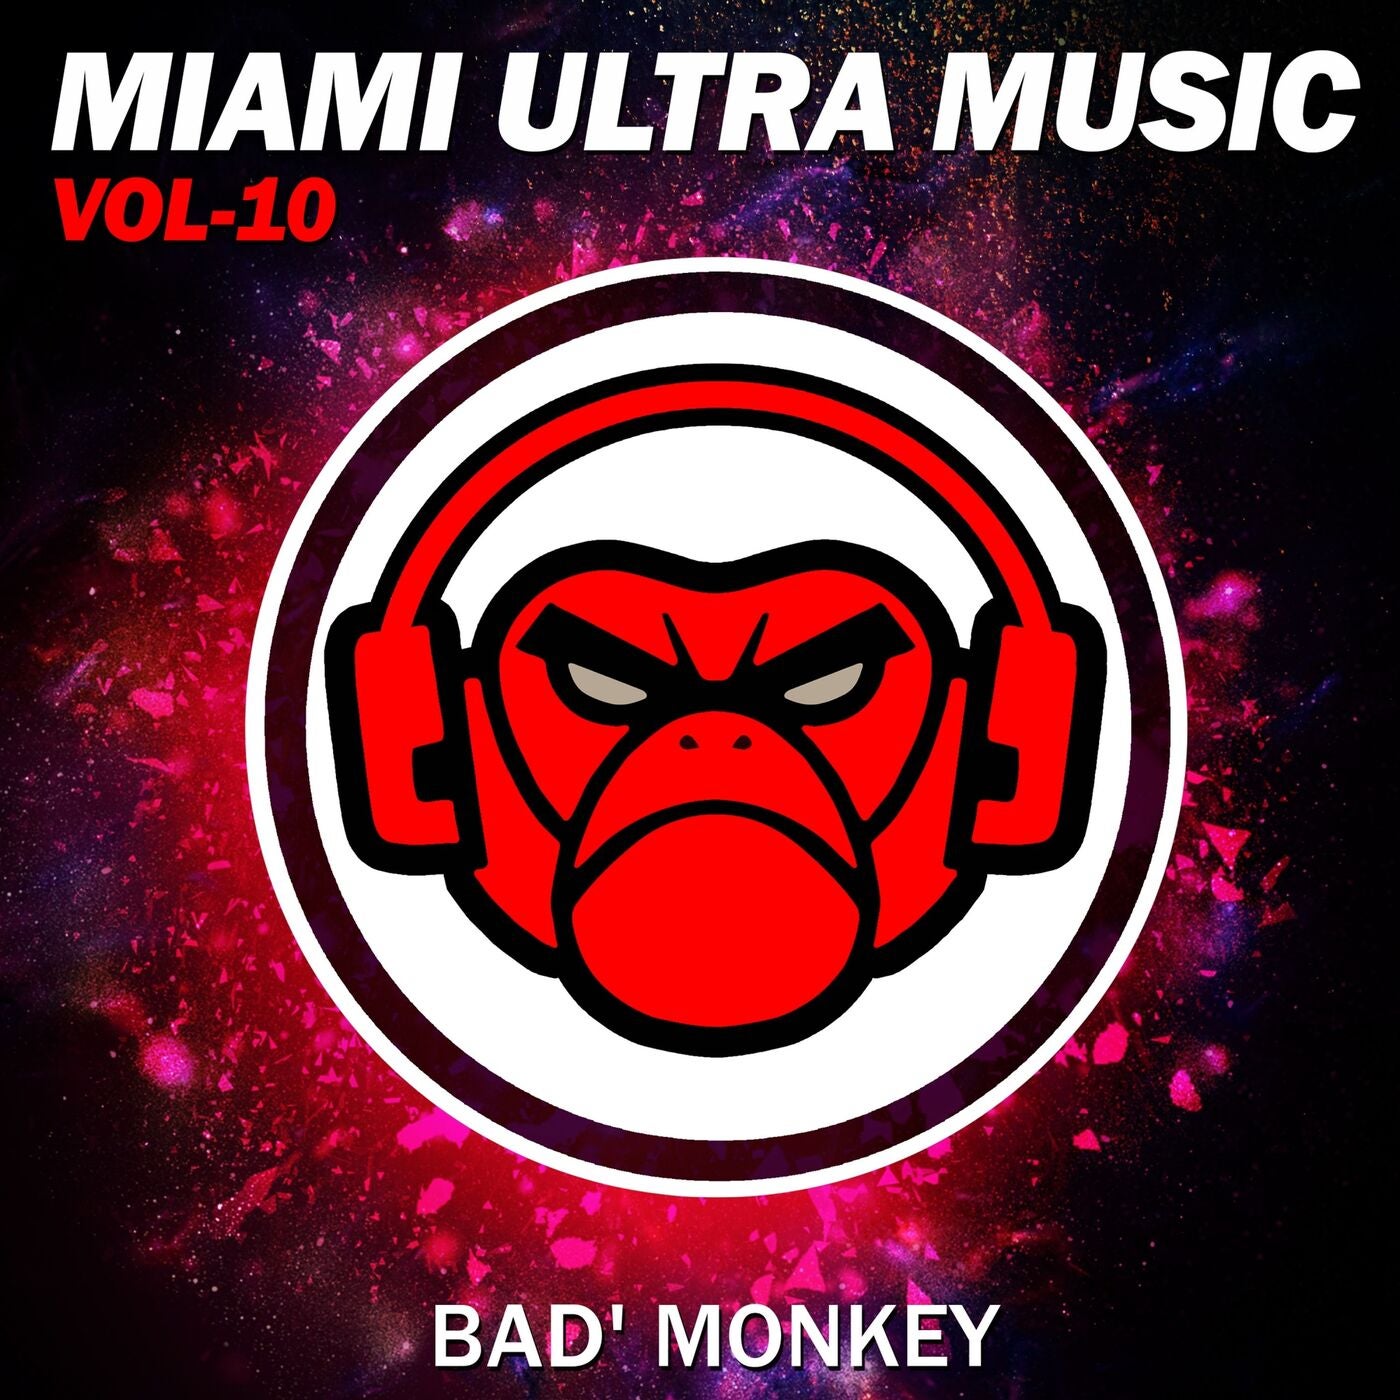 Miami Ultra Music Vol.10, compiled by Bad Monkey